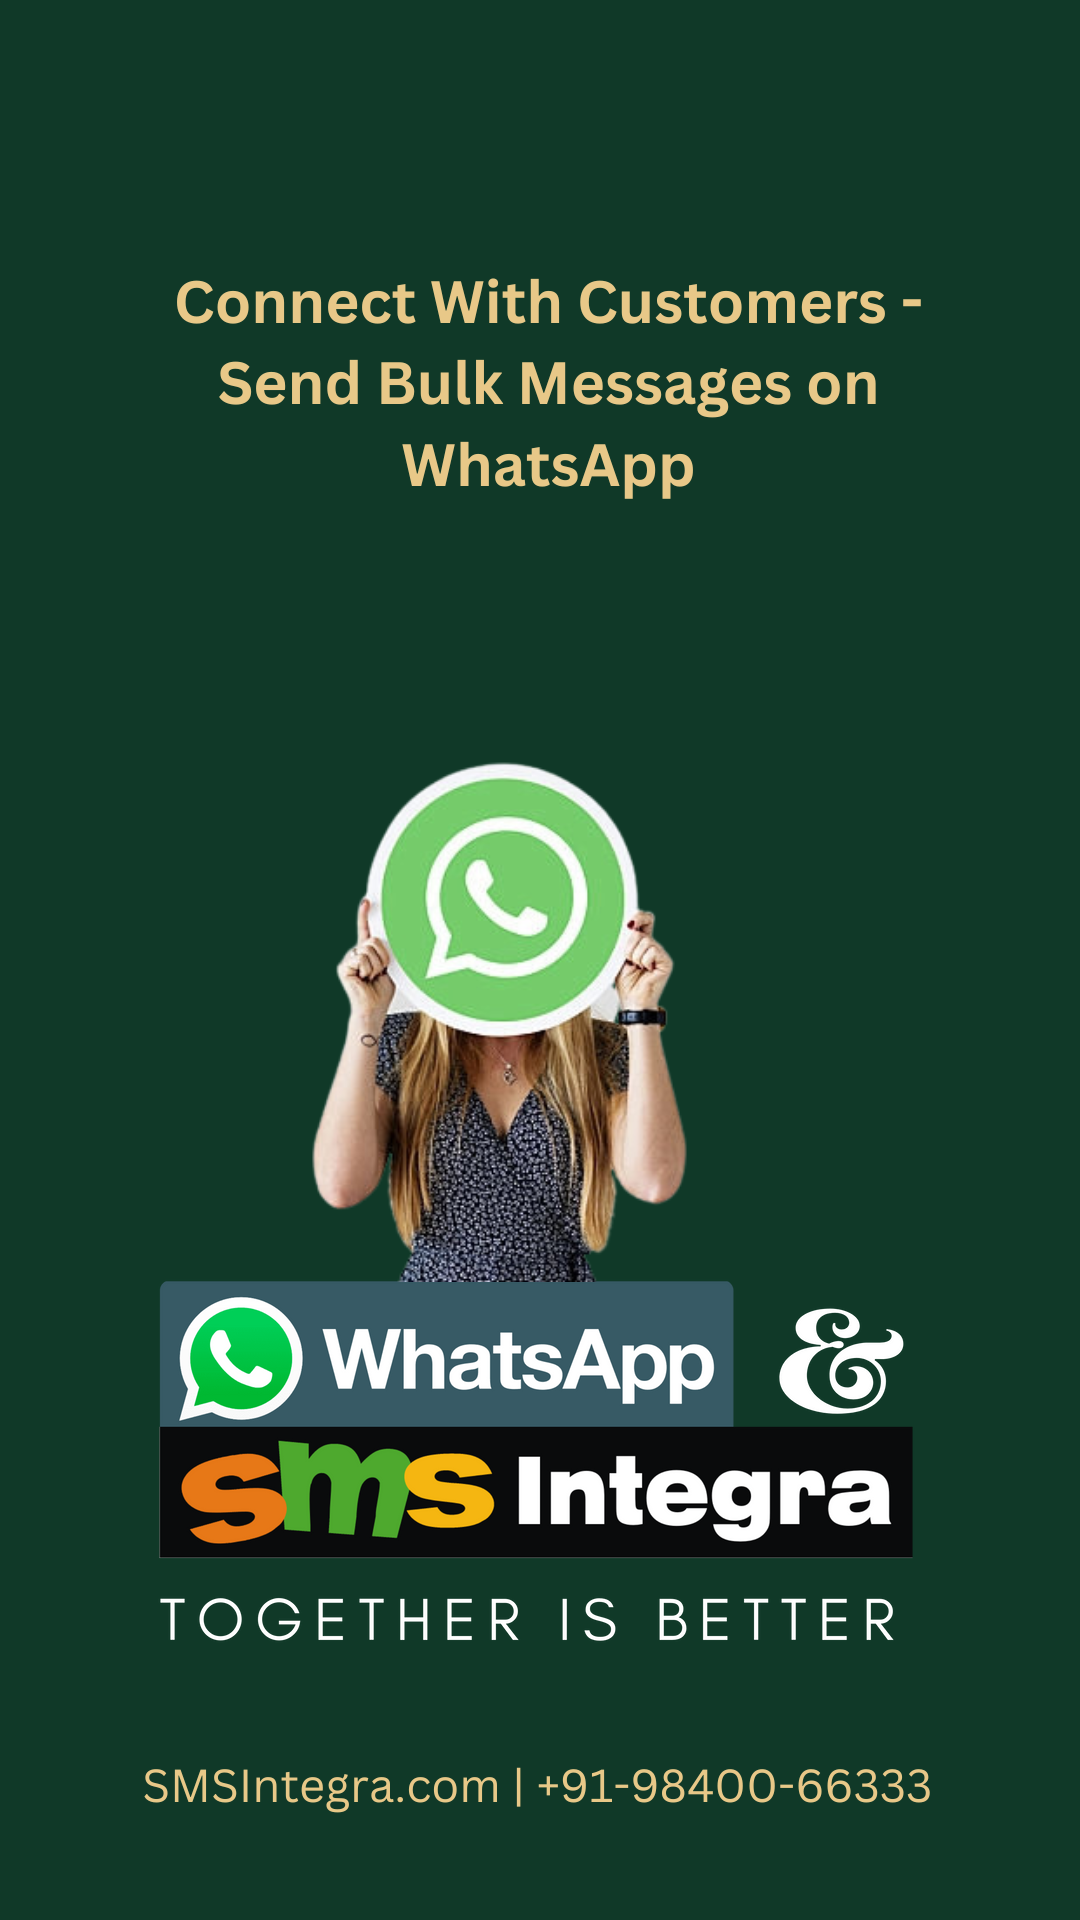 Sms marketing VS whatsapp marketing, which works better ? And why ?